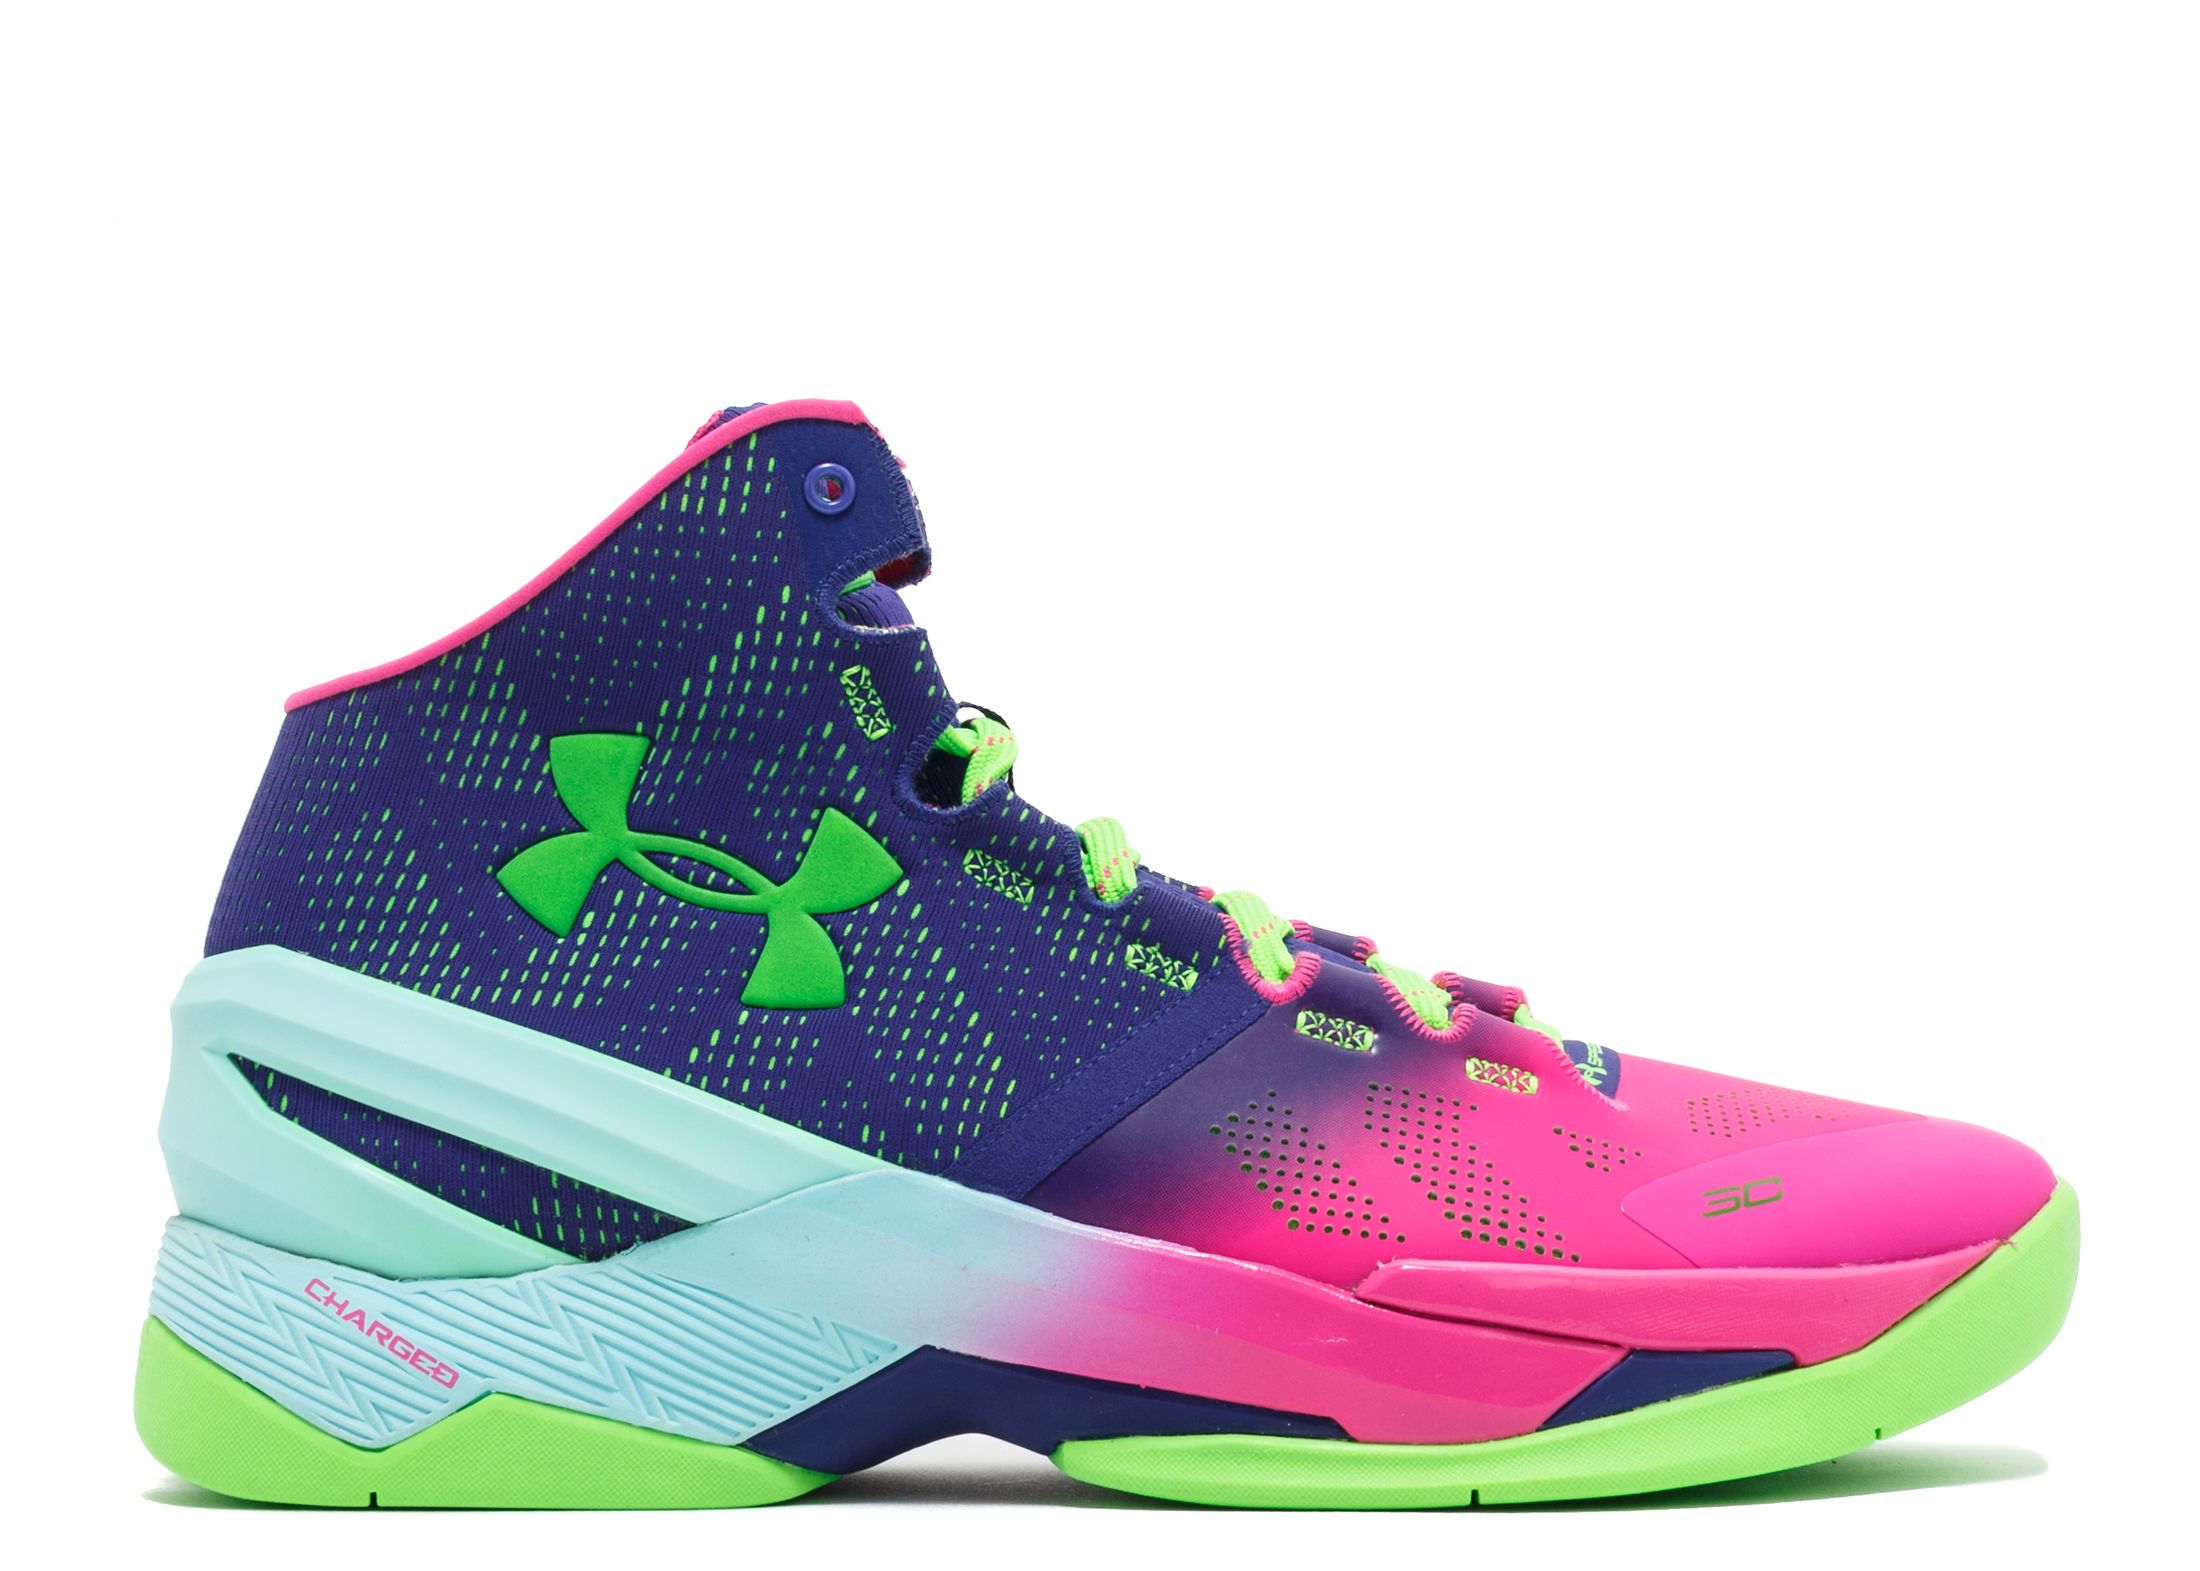 Curry 2 'Northern Lights' - Under Armour - 1259007 652 - rebel pink ...